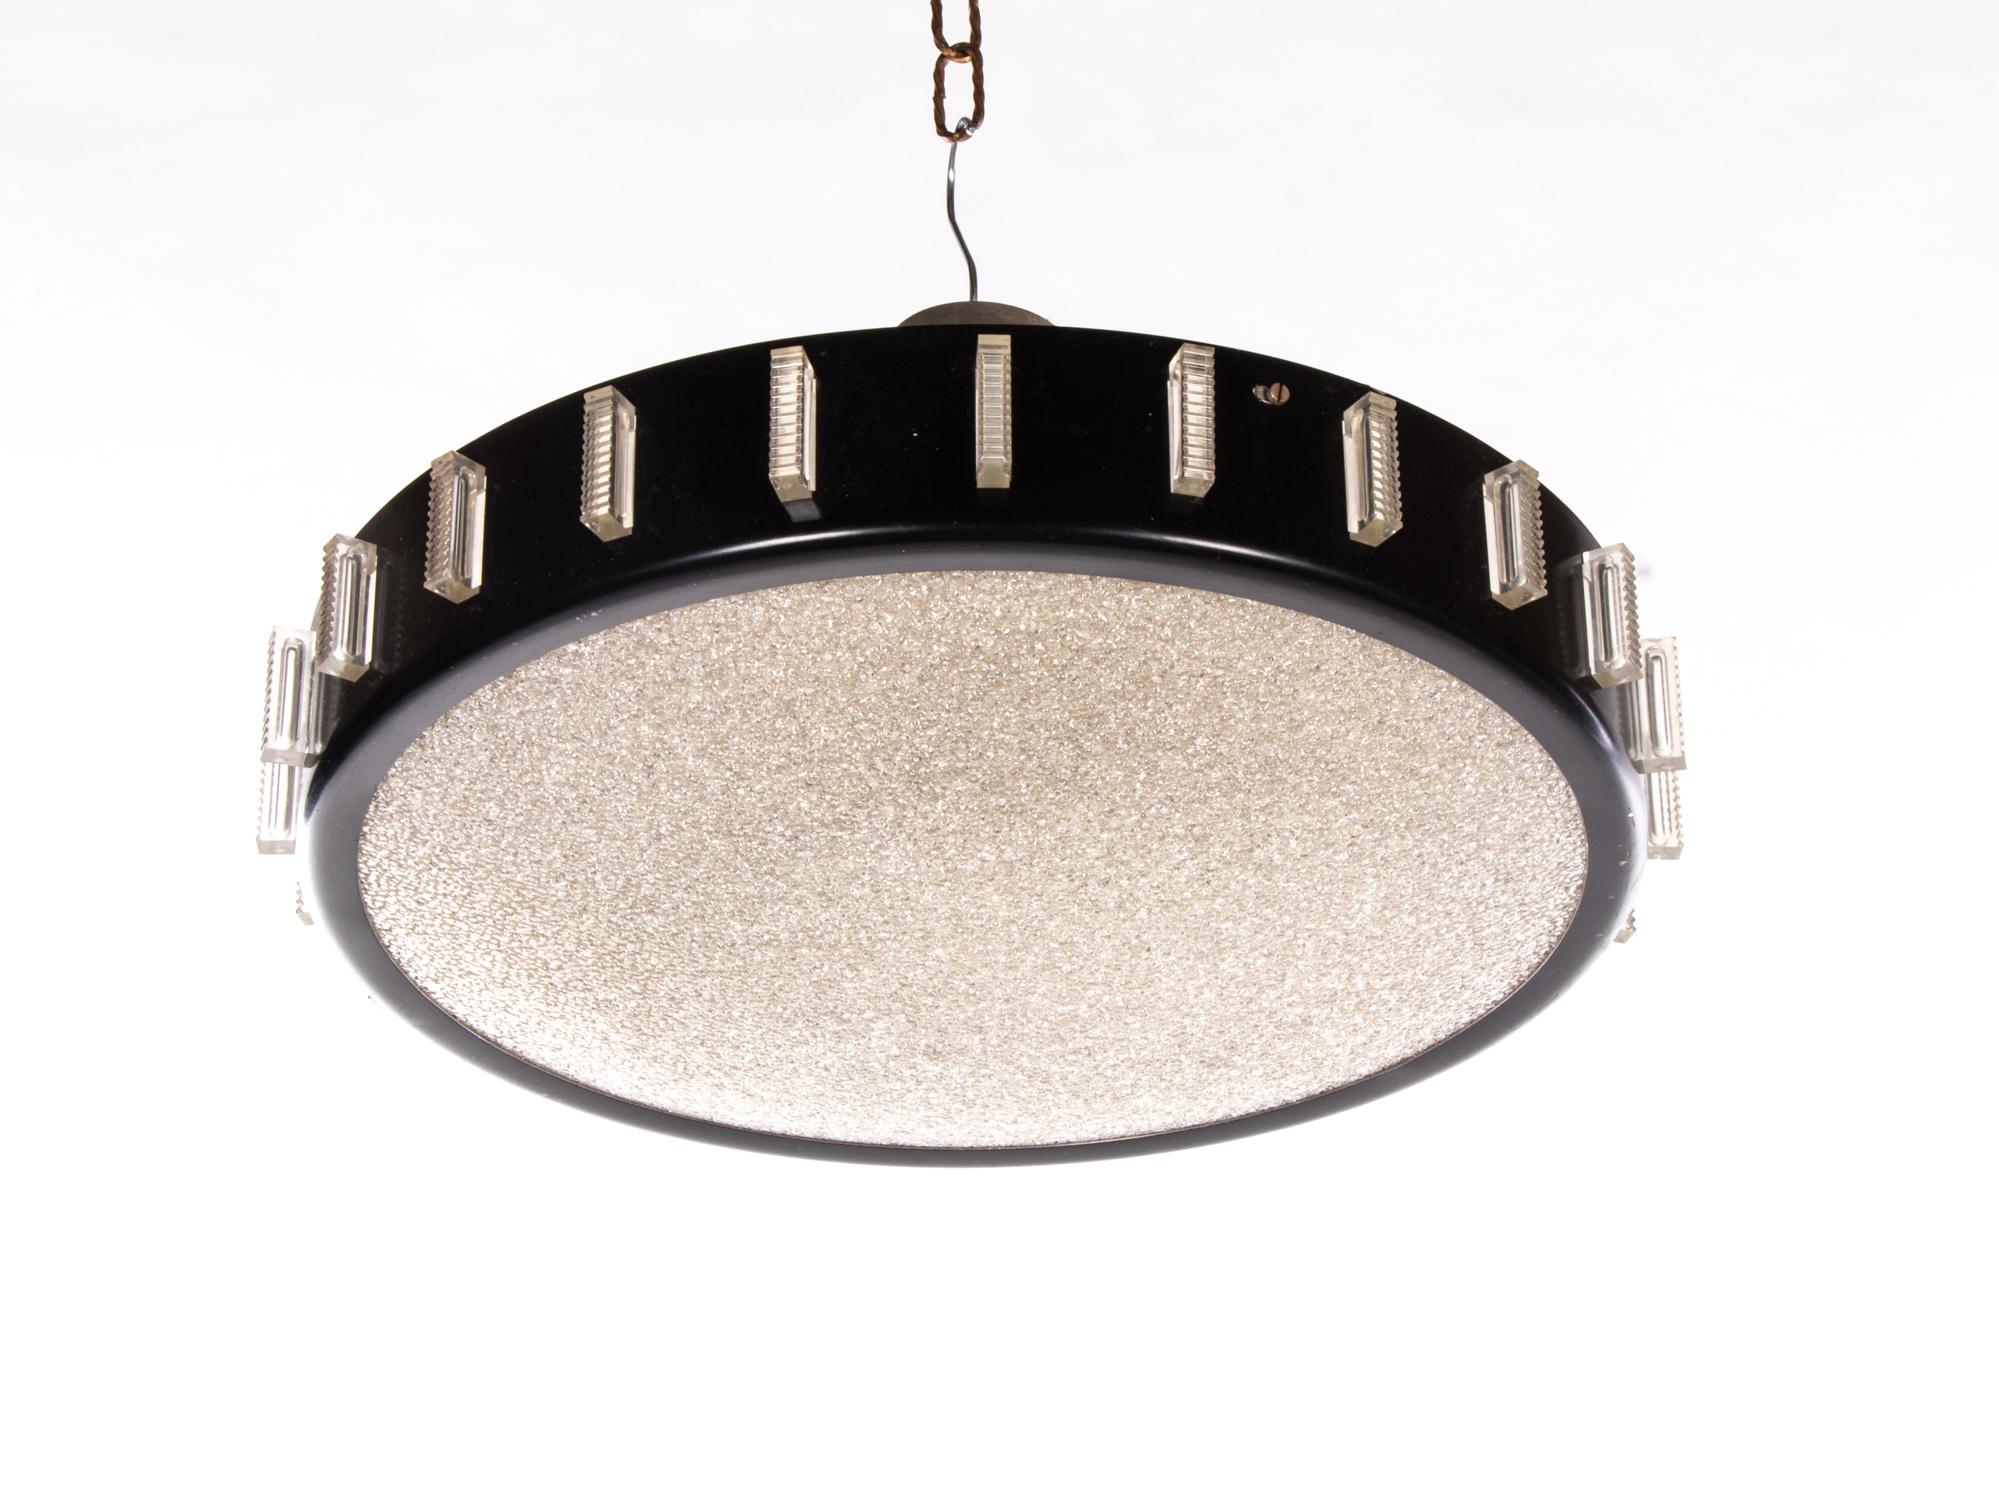 Elegant drum-shaped pendant made of black lacquered metal with plastic inserts. The lower shade is made of granulated plastic, that gives the lamp a very interesting texture. Made in the style of Stilnovo in Italy in the 1950s. 

Design: Stilnovo